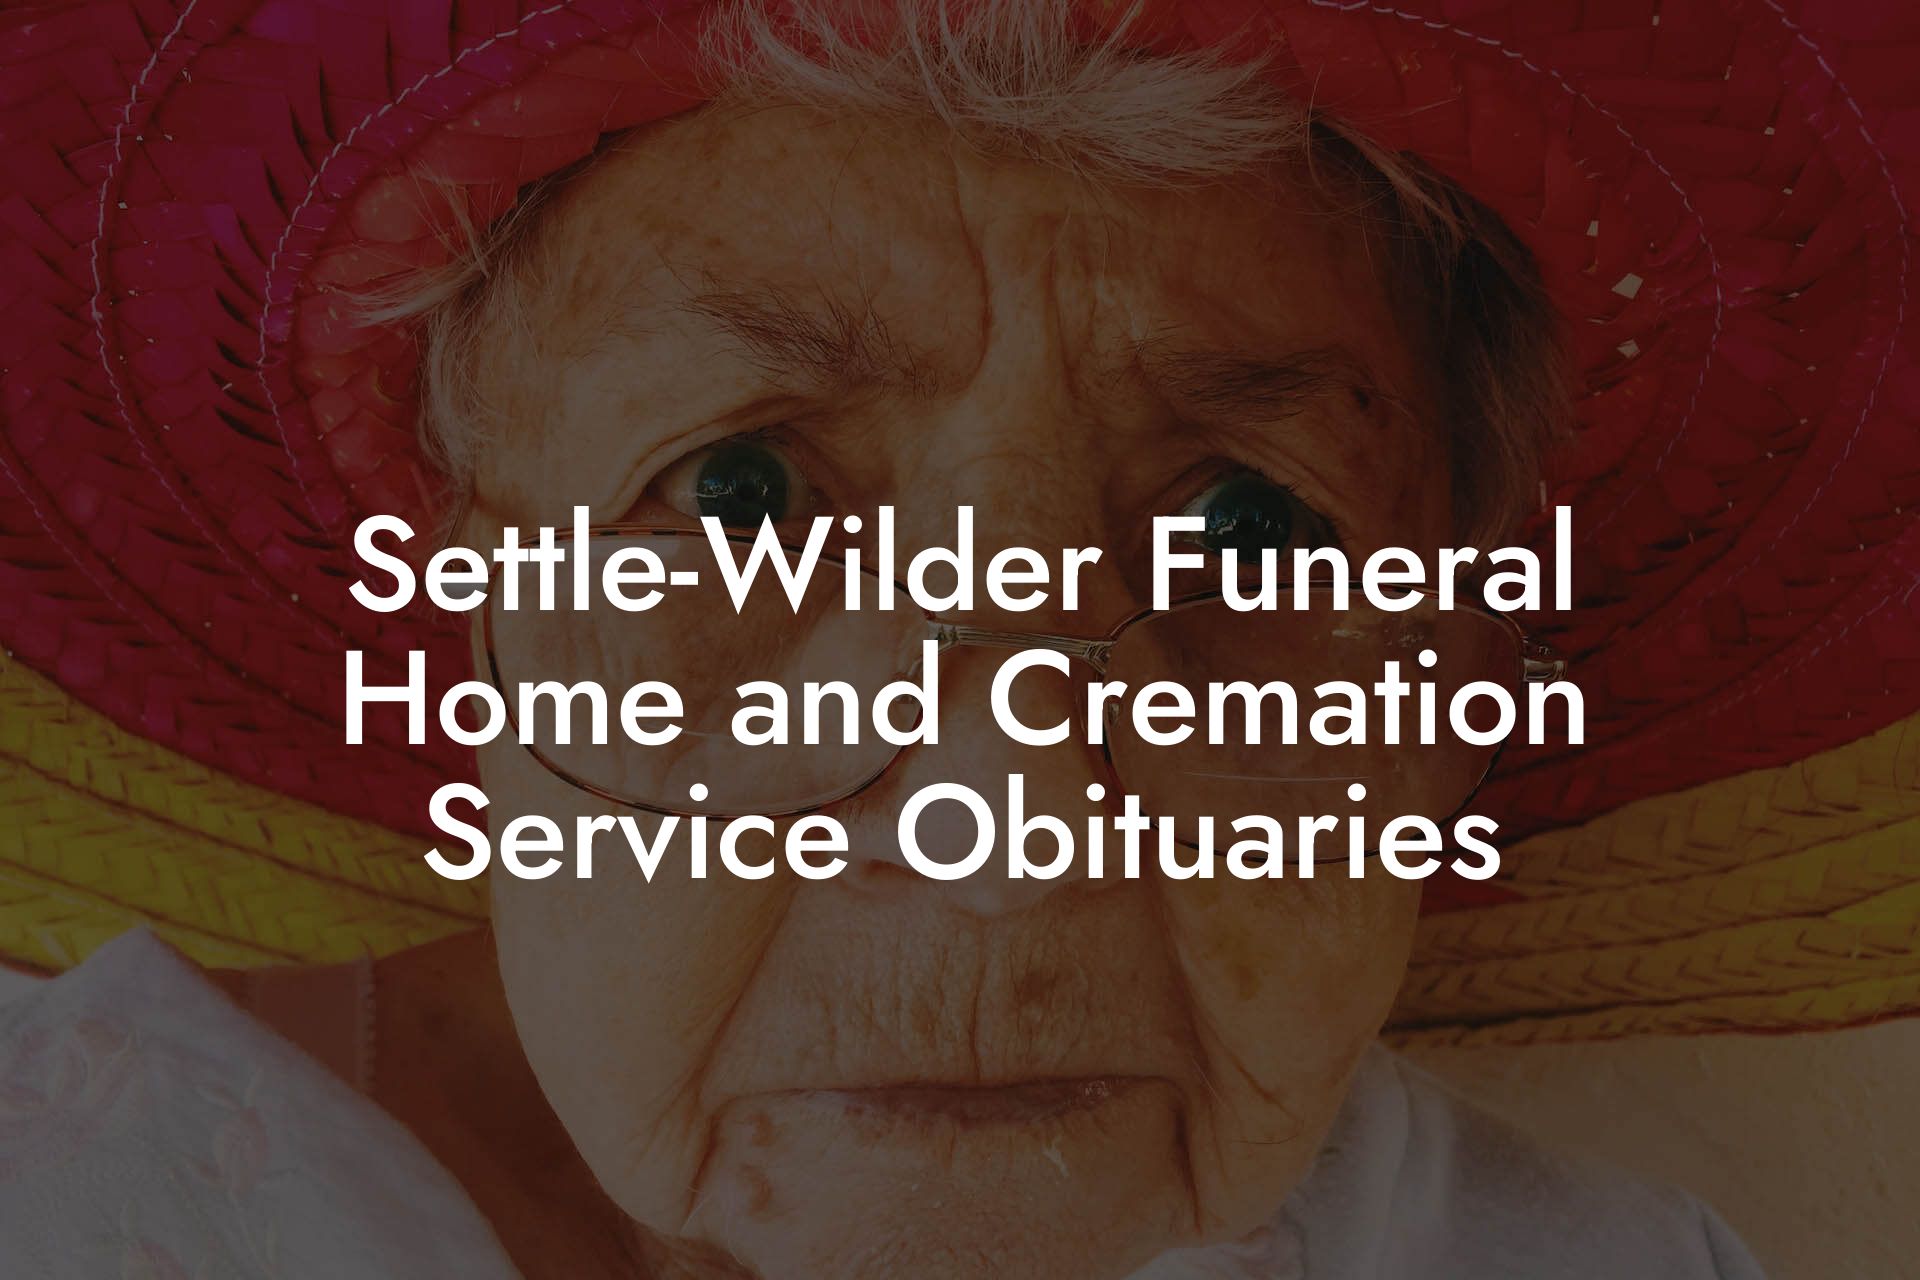 Settle-Wilder Funeral Home and Cremation Service Obituaries